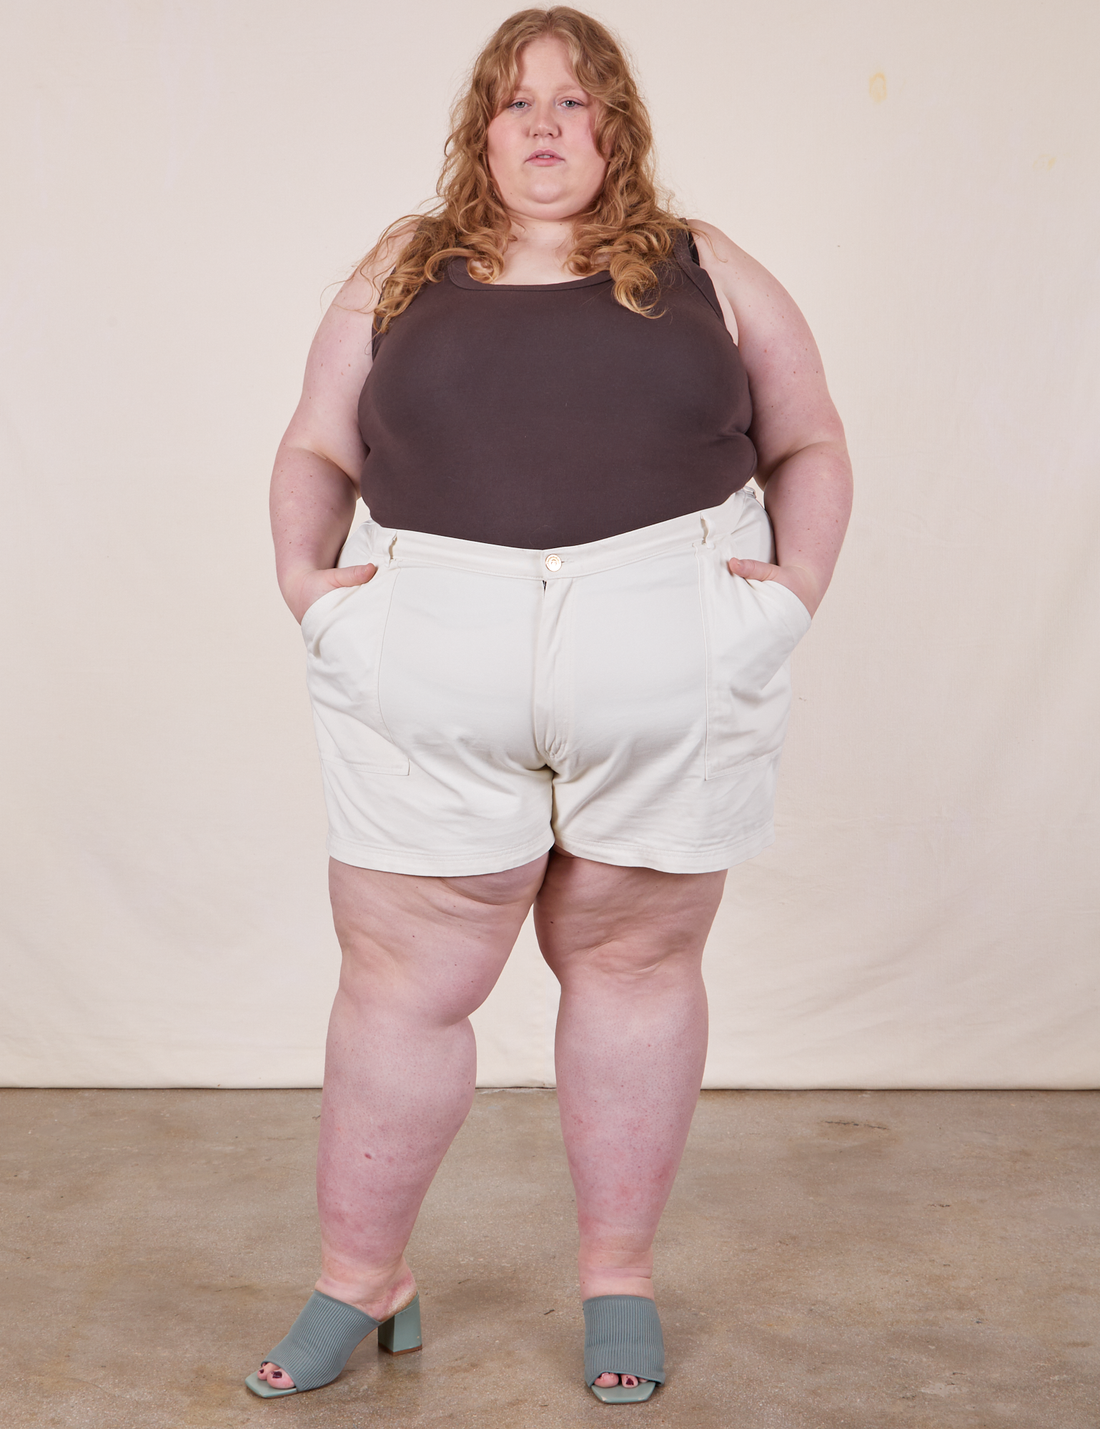 Catie is 5'11" and wearing size 5XL  Classic Work Shorts in Vintage Off-White paired with espresso brown Tank Top